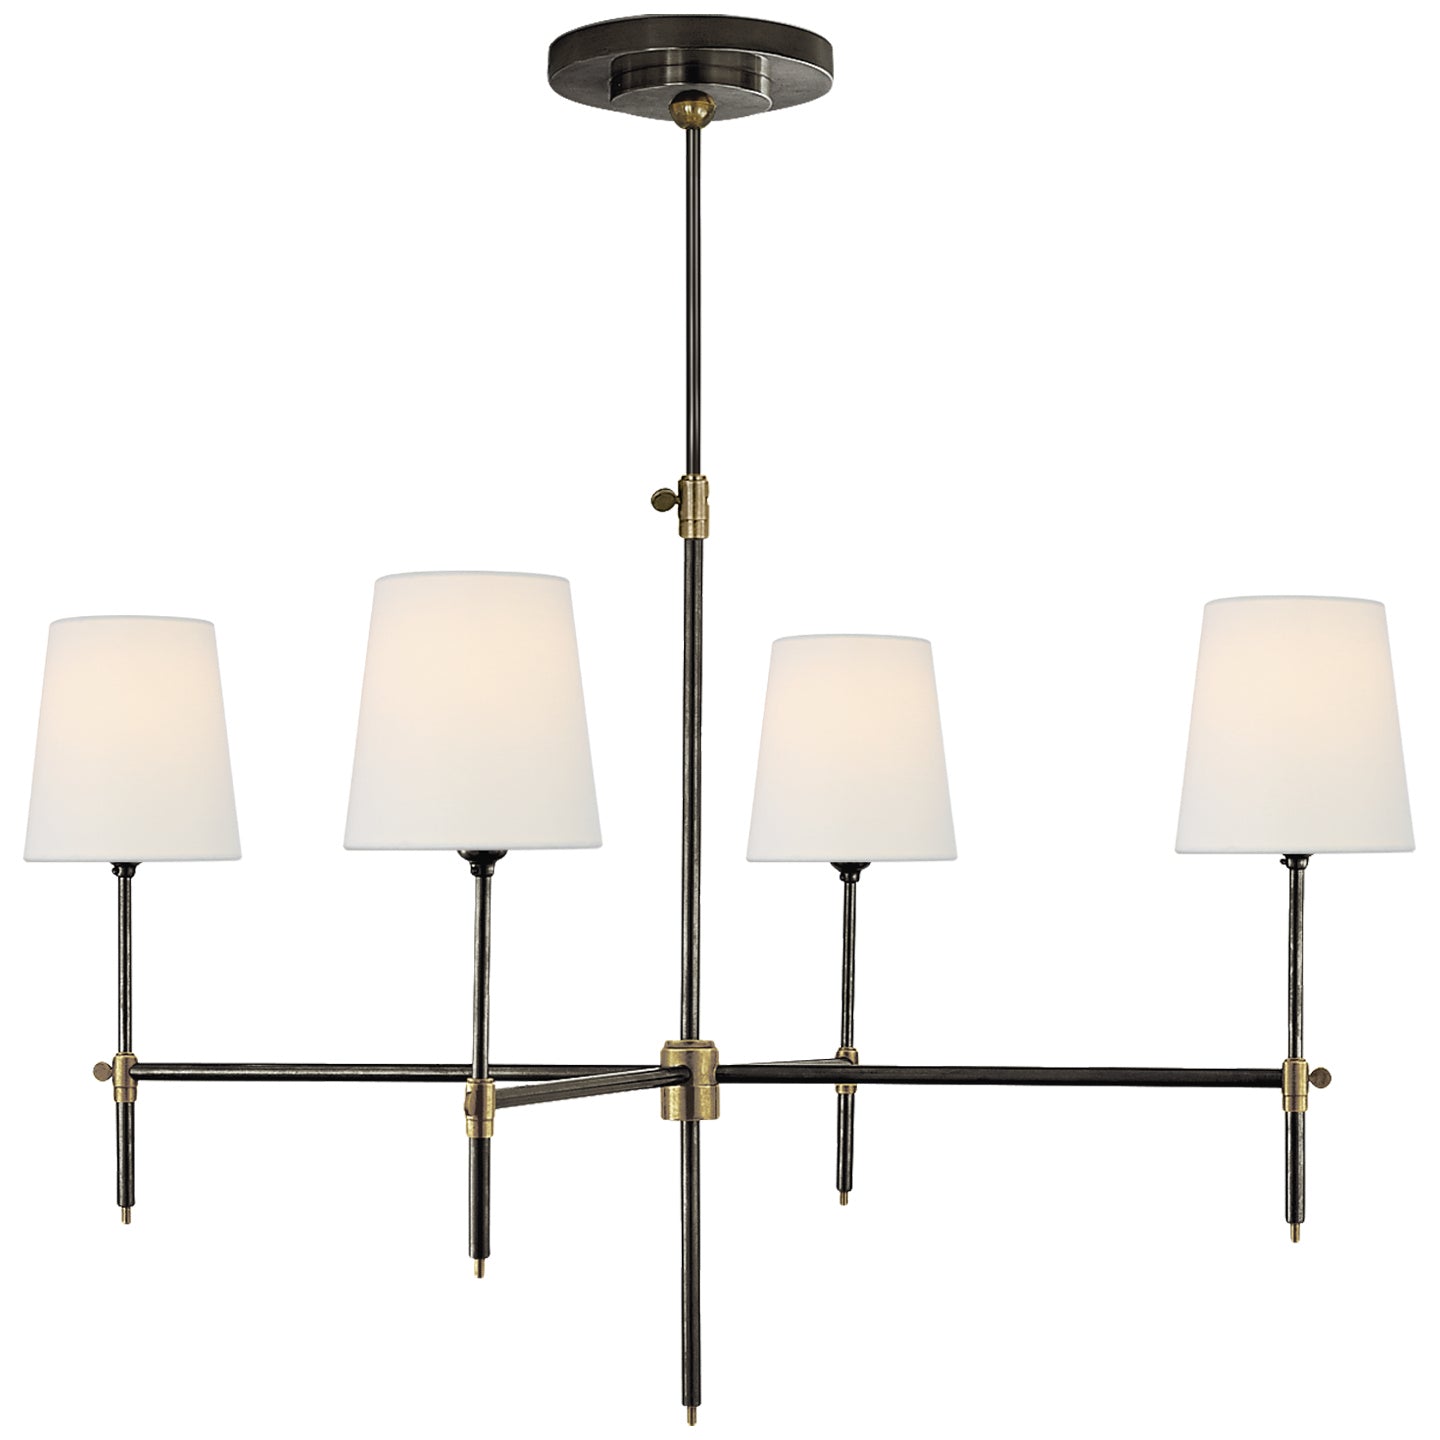 Visual Comfort Signature Canada - Four Light Chandelier - Bryant - Bronze and Hand-Rubbed Antique Brass- Union Lighting Luminaires Decor